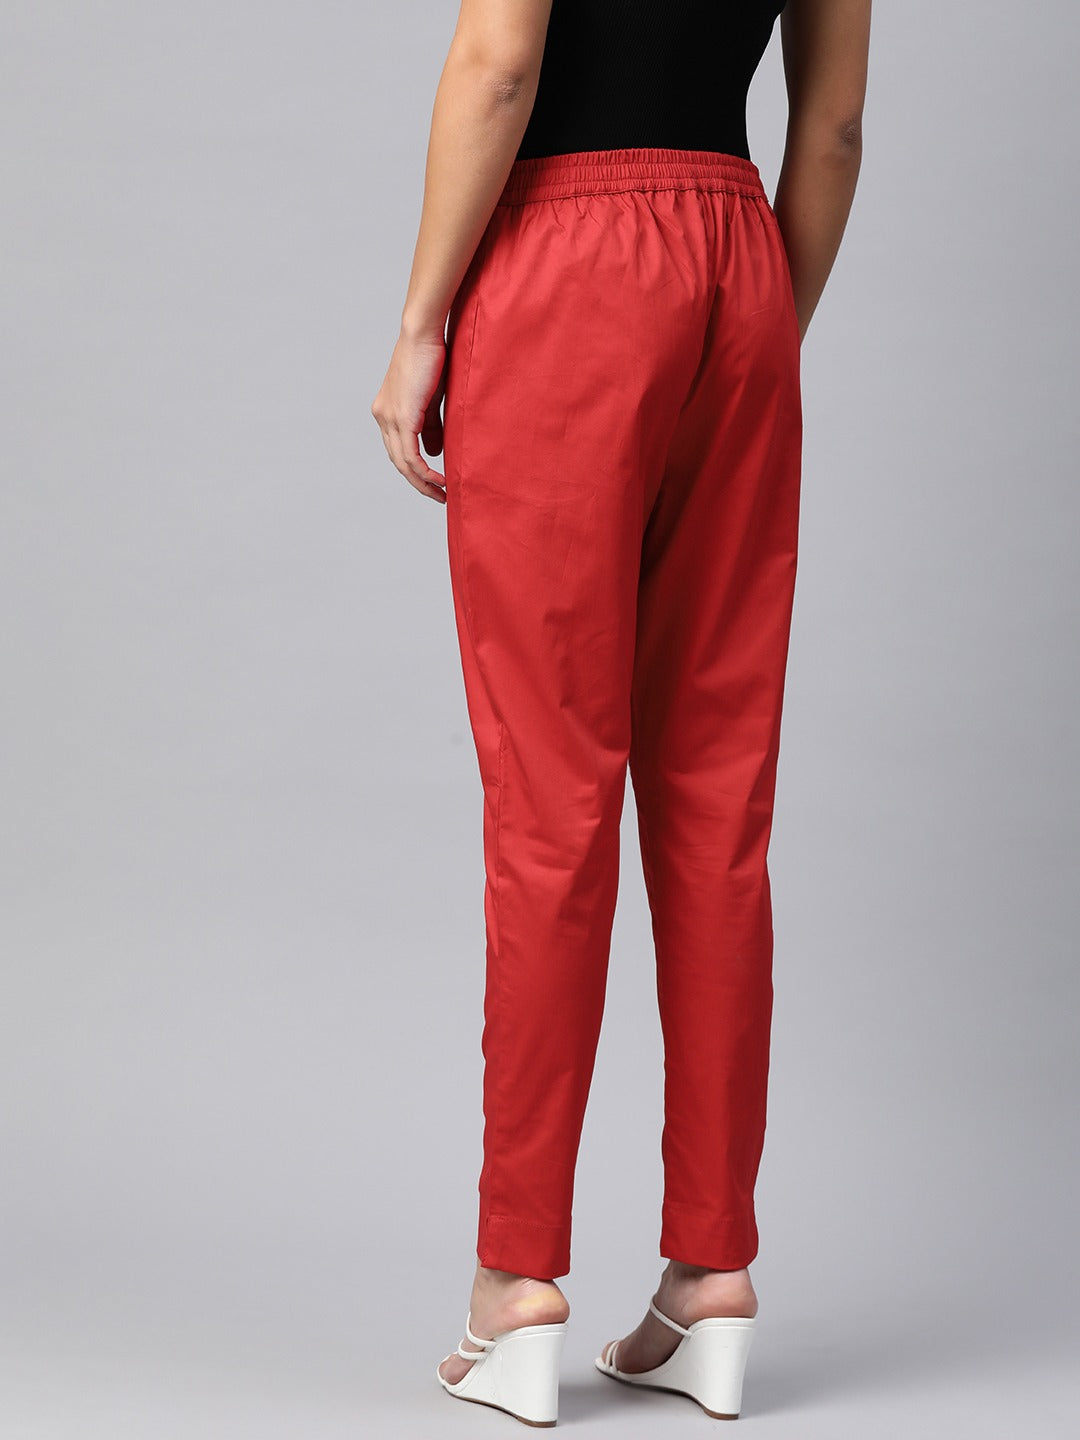 Cotton Lycra Fabric Red Color Trouser